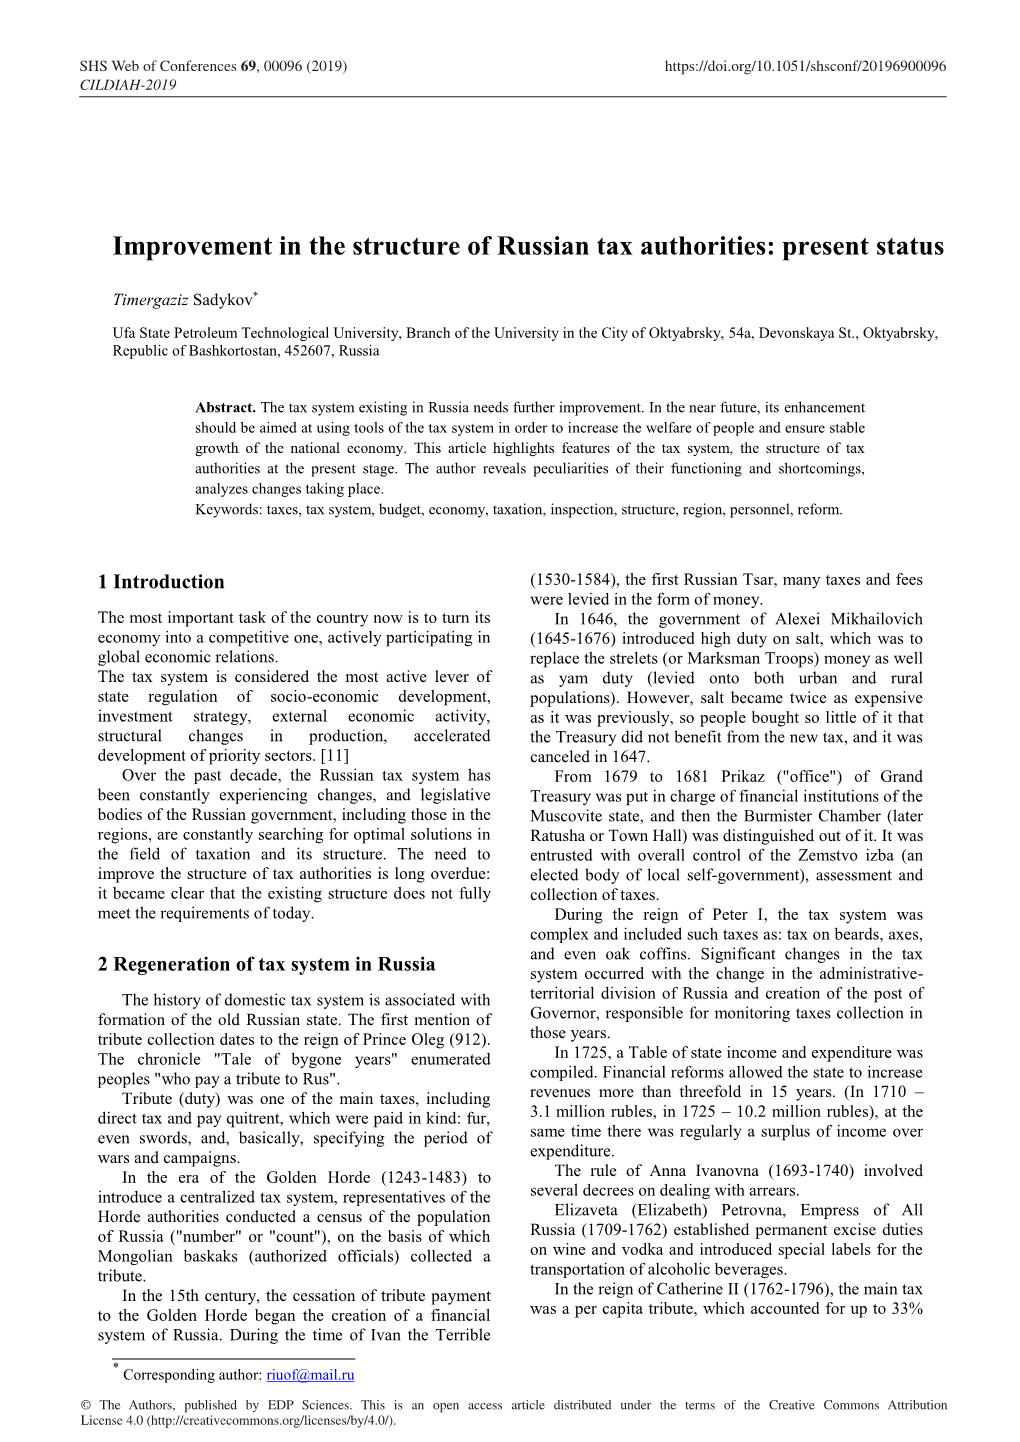 Improvement in the Structure of Russian Tax Authorities: Present Status